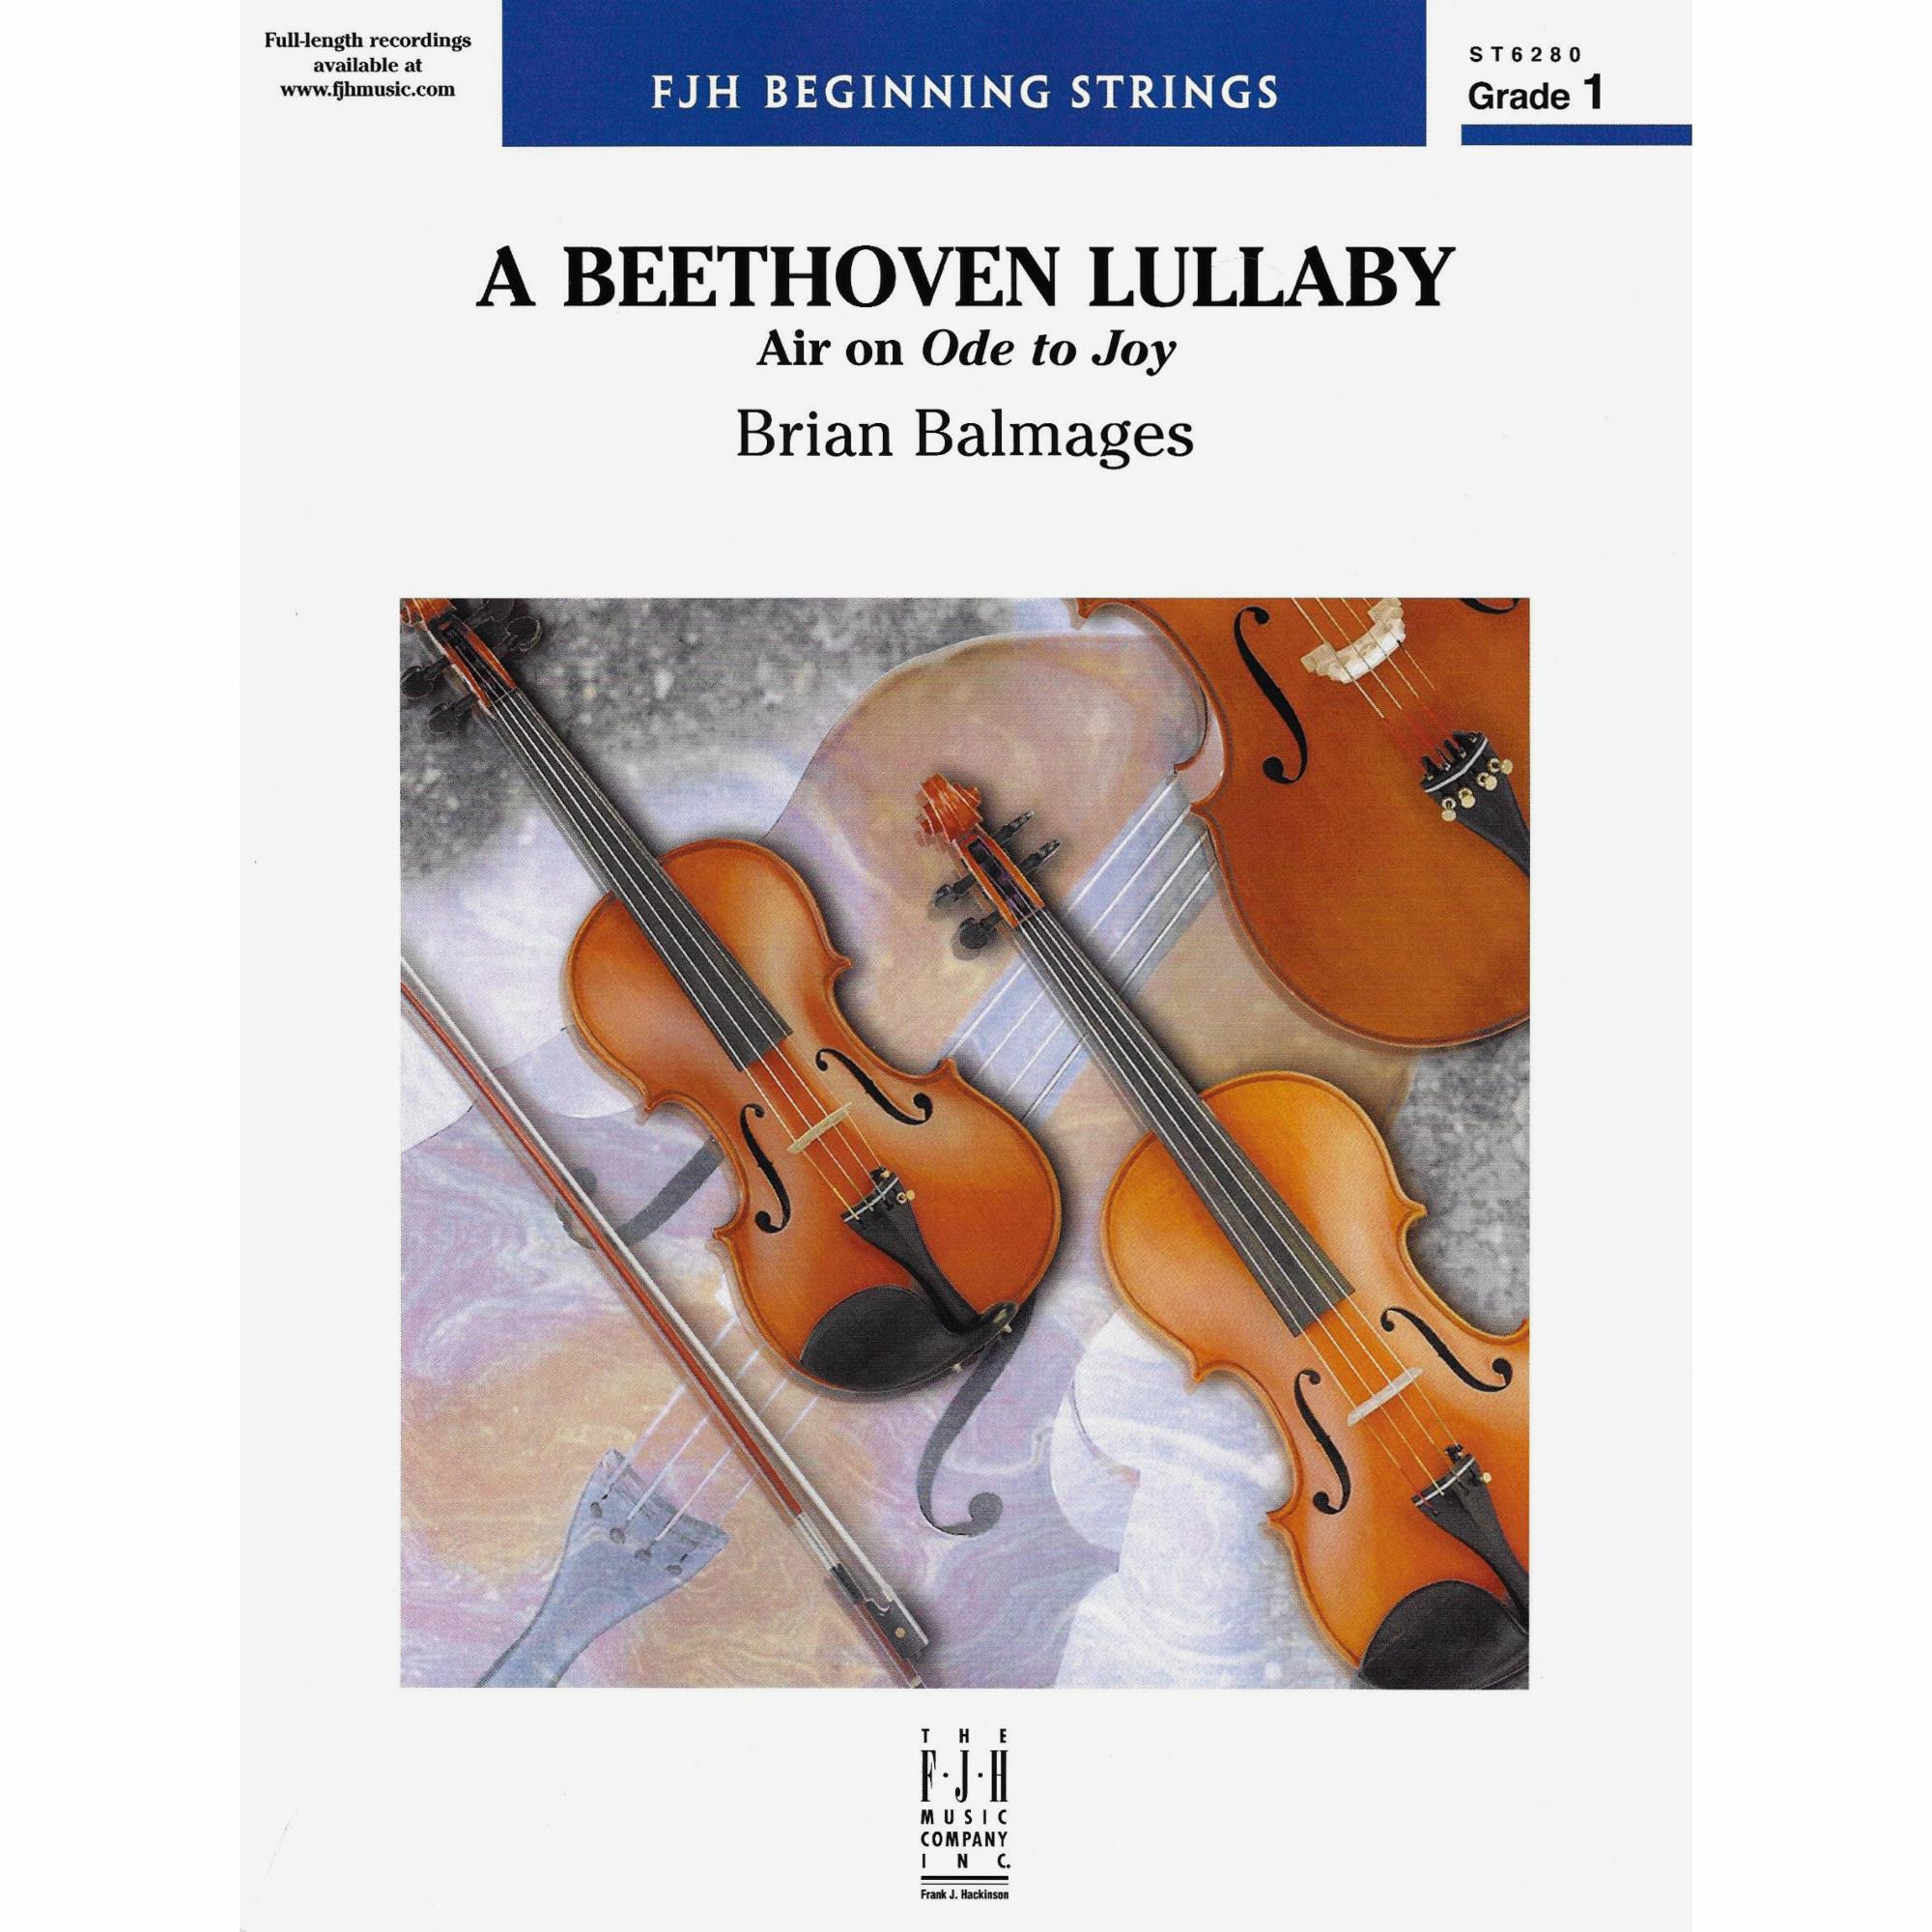 A Beethoven Lullaby for String Orchestra